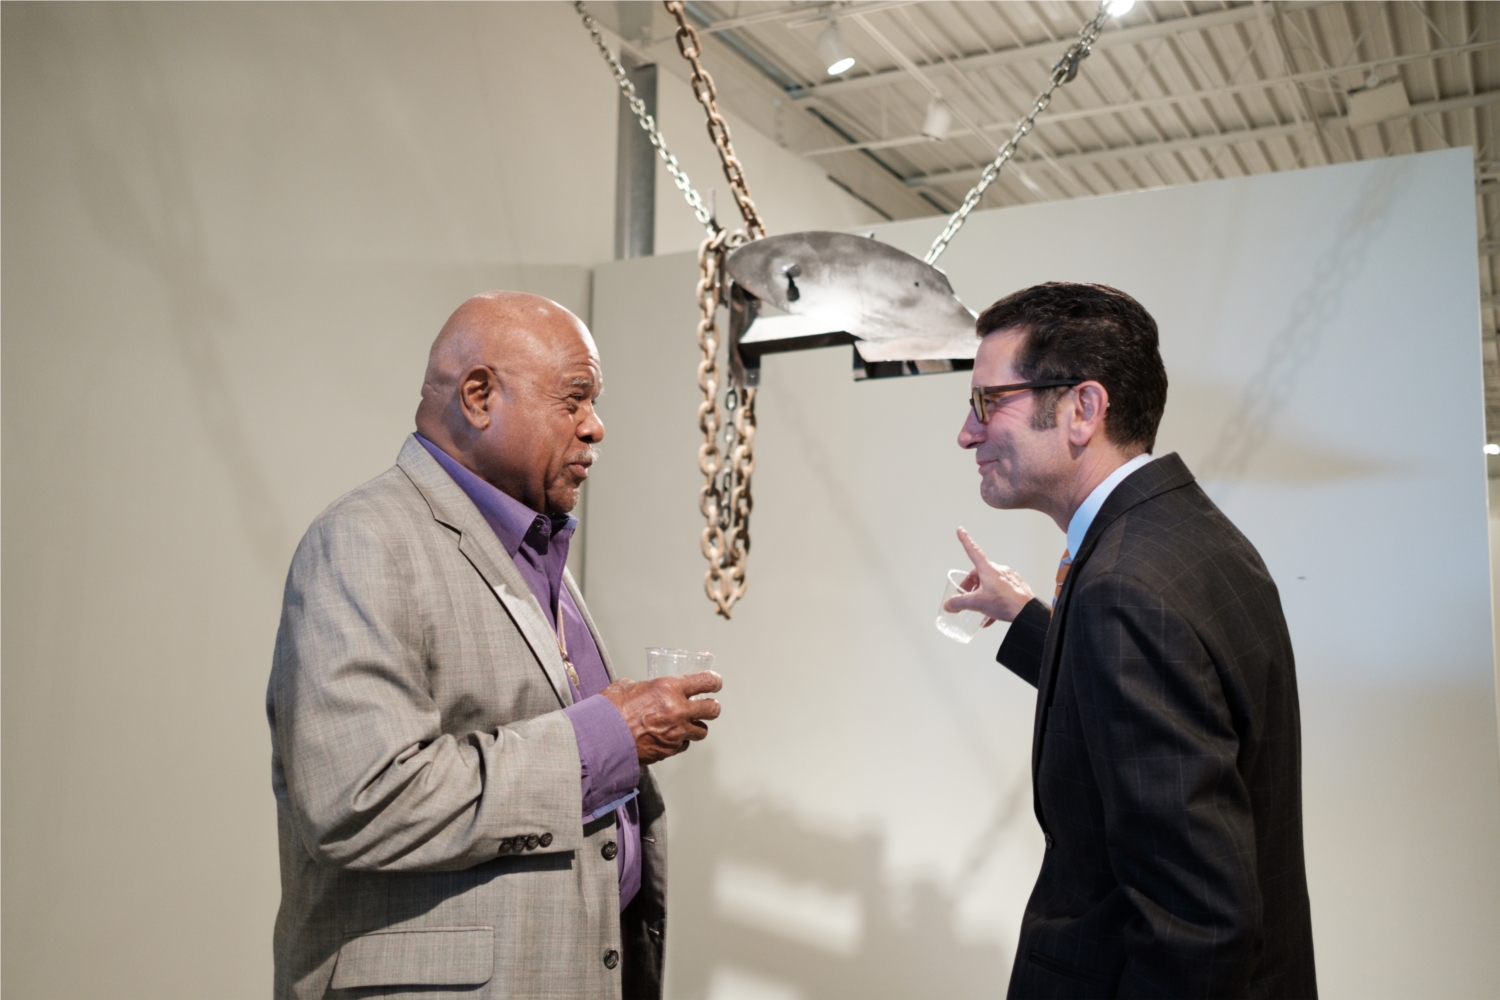 Internationally recognized sculptor Melvin Edwards and Oklahoma Contemporary Exhibitions Manager Steve Boyd chat at the opening of Edwards' exhibition, his first in the state in 25 years.